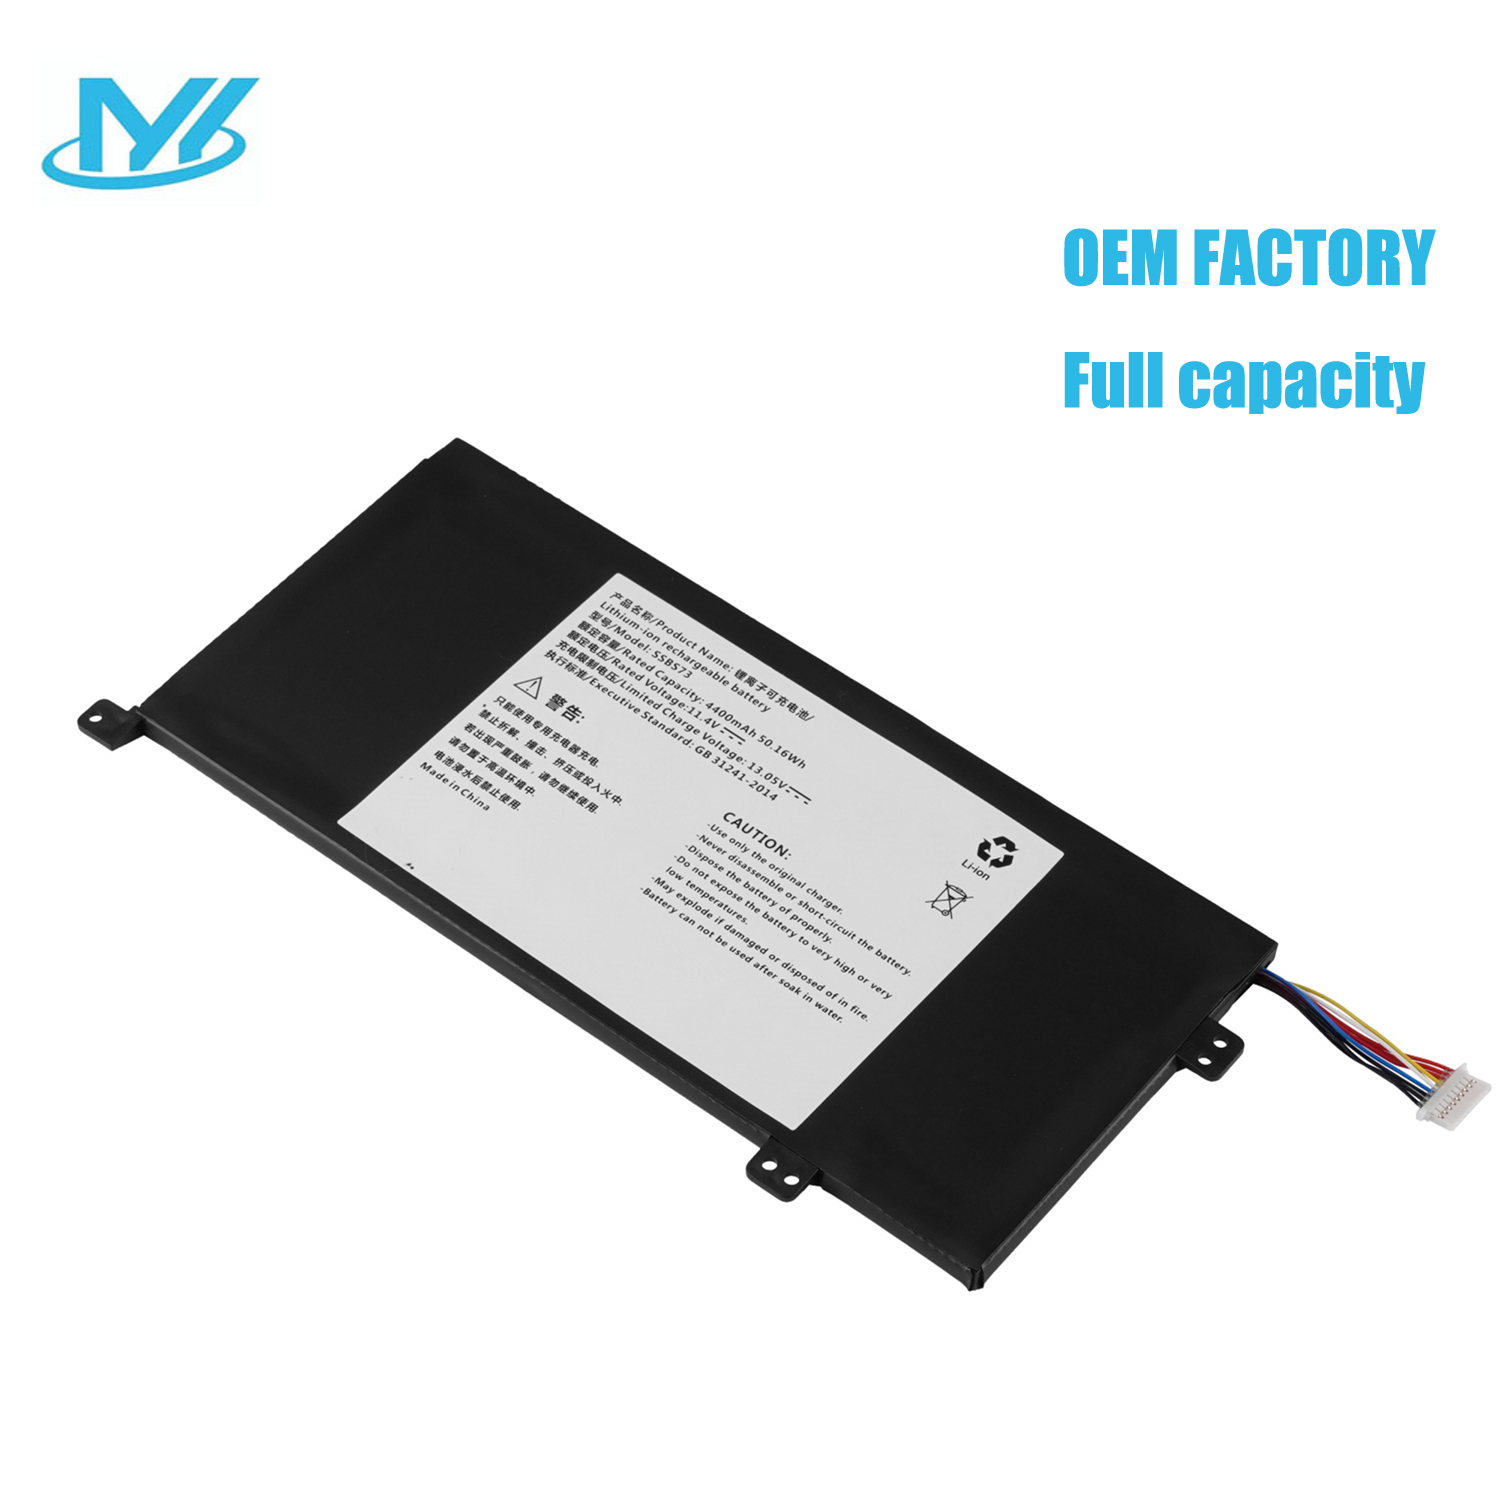 SSBS73 rechargeable lithium ion Notebook battery Laptop battery S1 PRO-01 S1 PRO-02 S2 MX350 11.4V 50.16WH 4400MAH